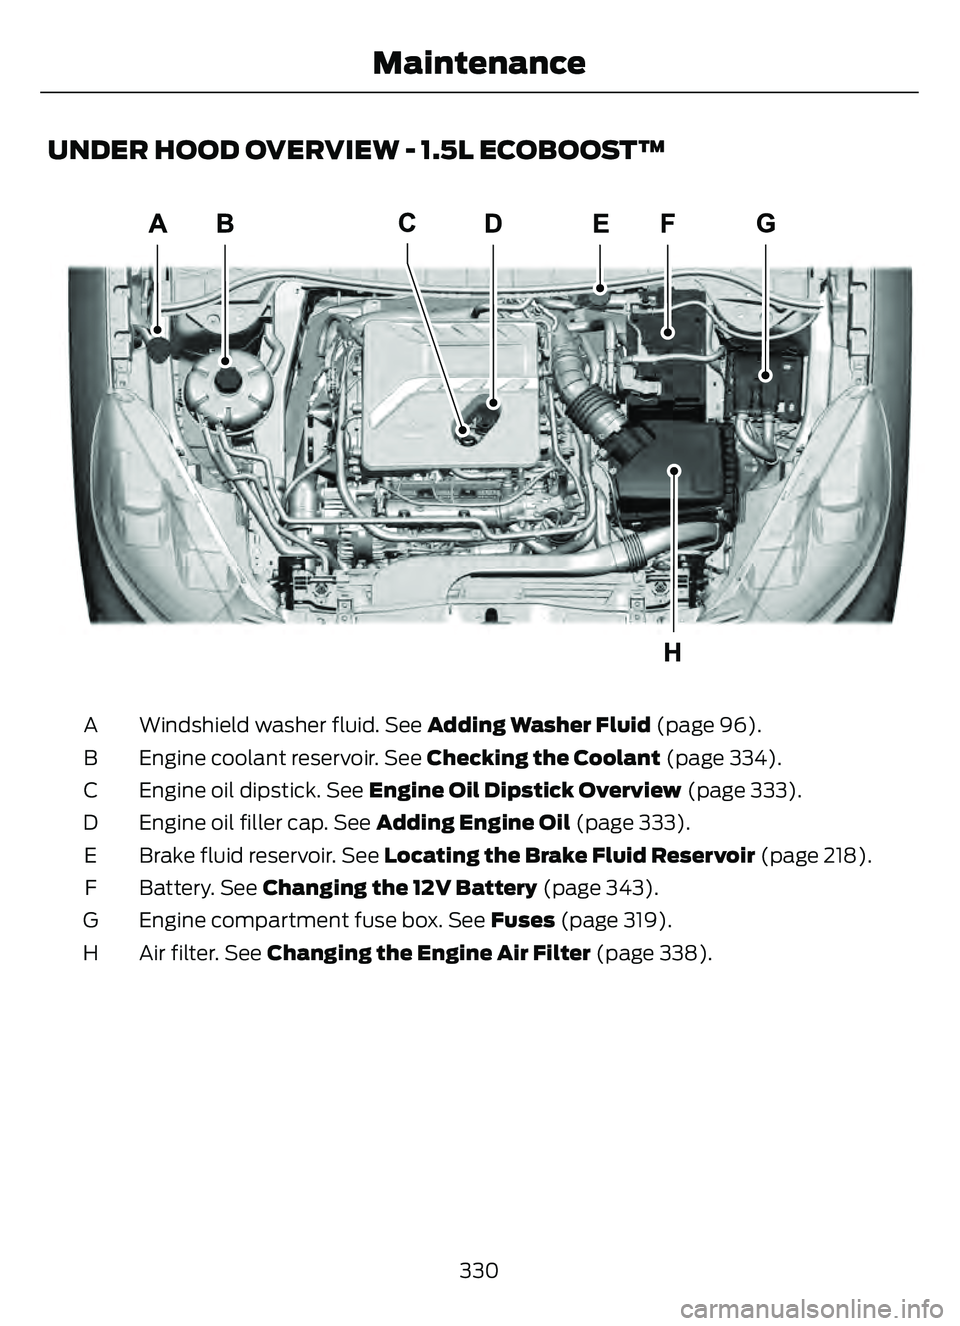 FORD ESCAPE 2022  Owners Manual UNDER HOOD OVERVIEW - 1.5L ECOBOOST™
308 93E308193
Windshield washer fluid. See Adding Washer Fluid (page 96).
A
Engine coolant reservoir. See  Checking the Coolant (page 334).
B
Engine oil dipstick